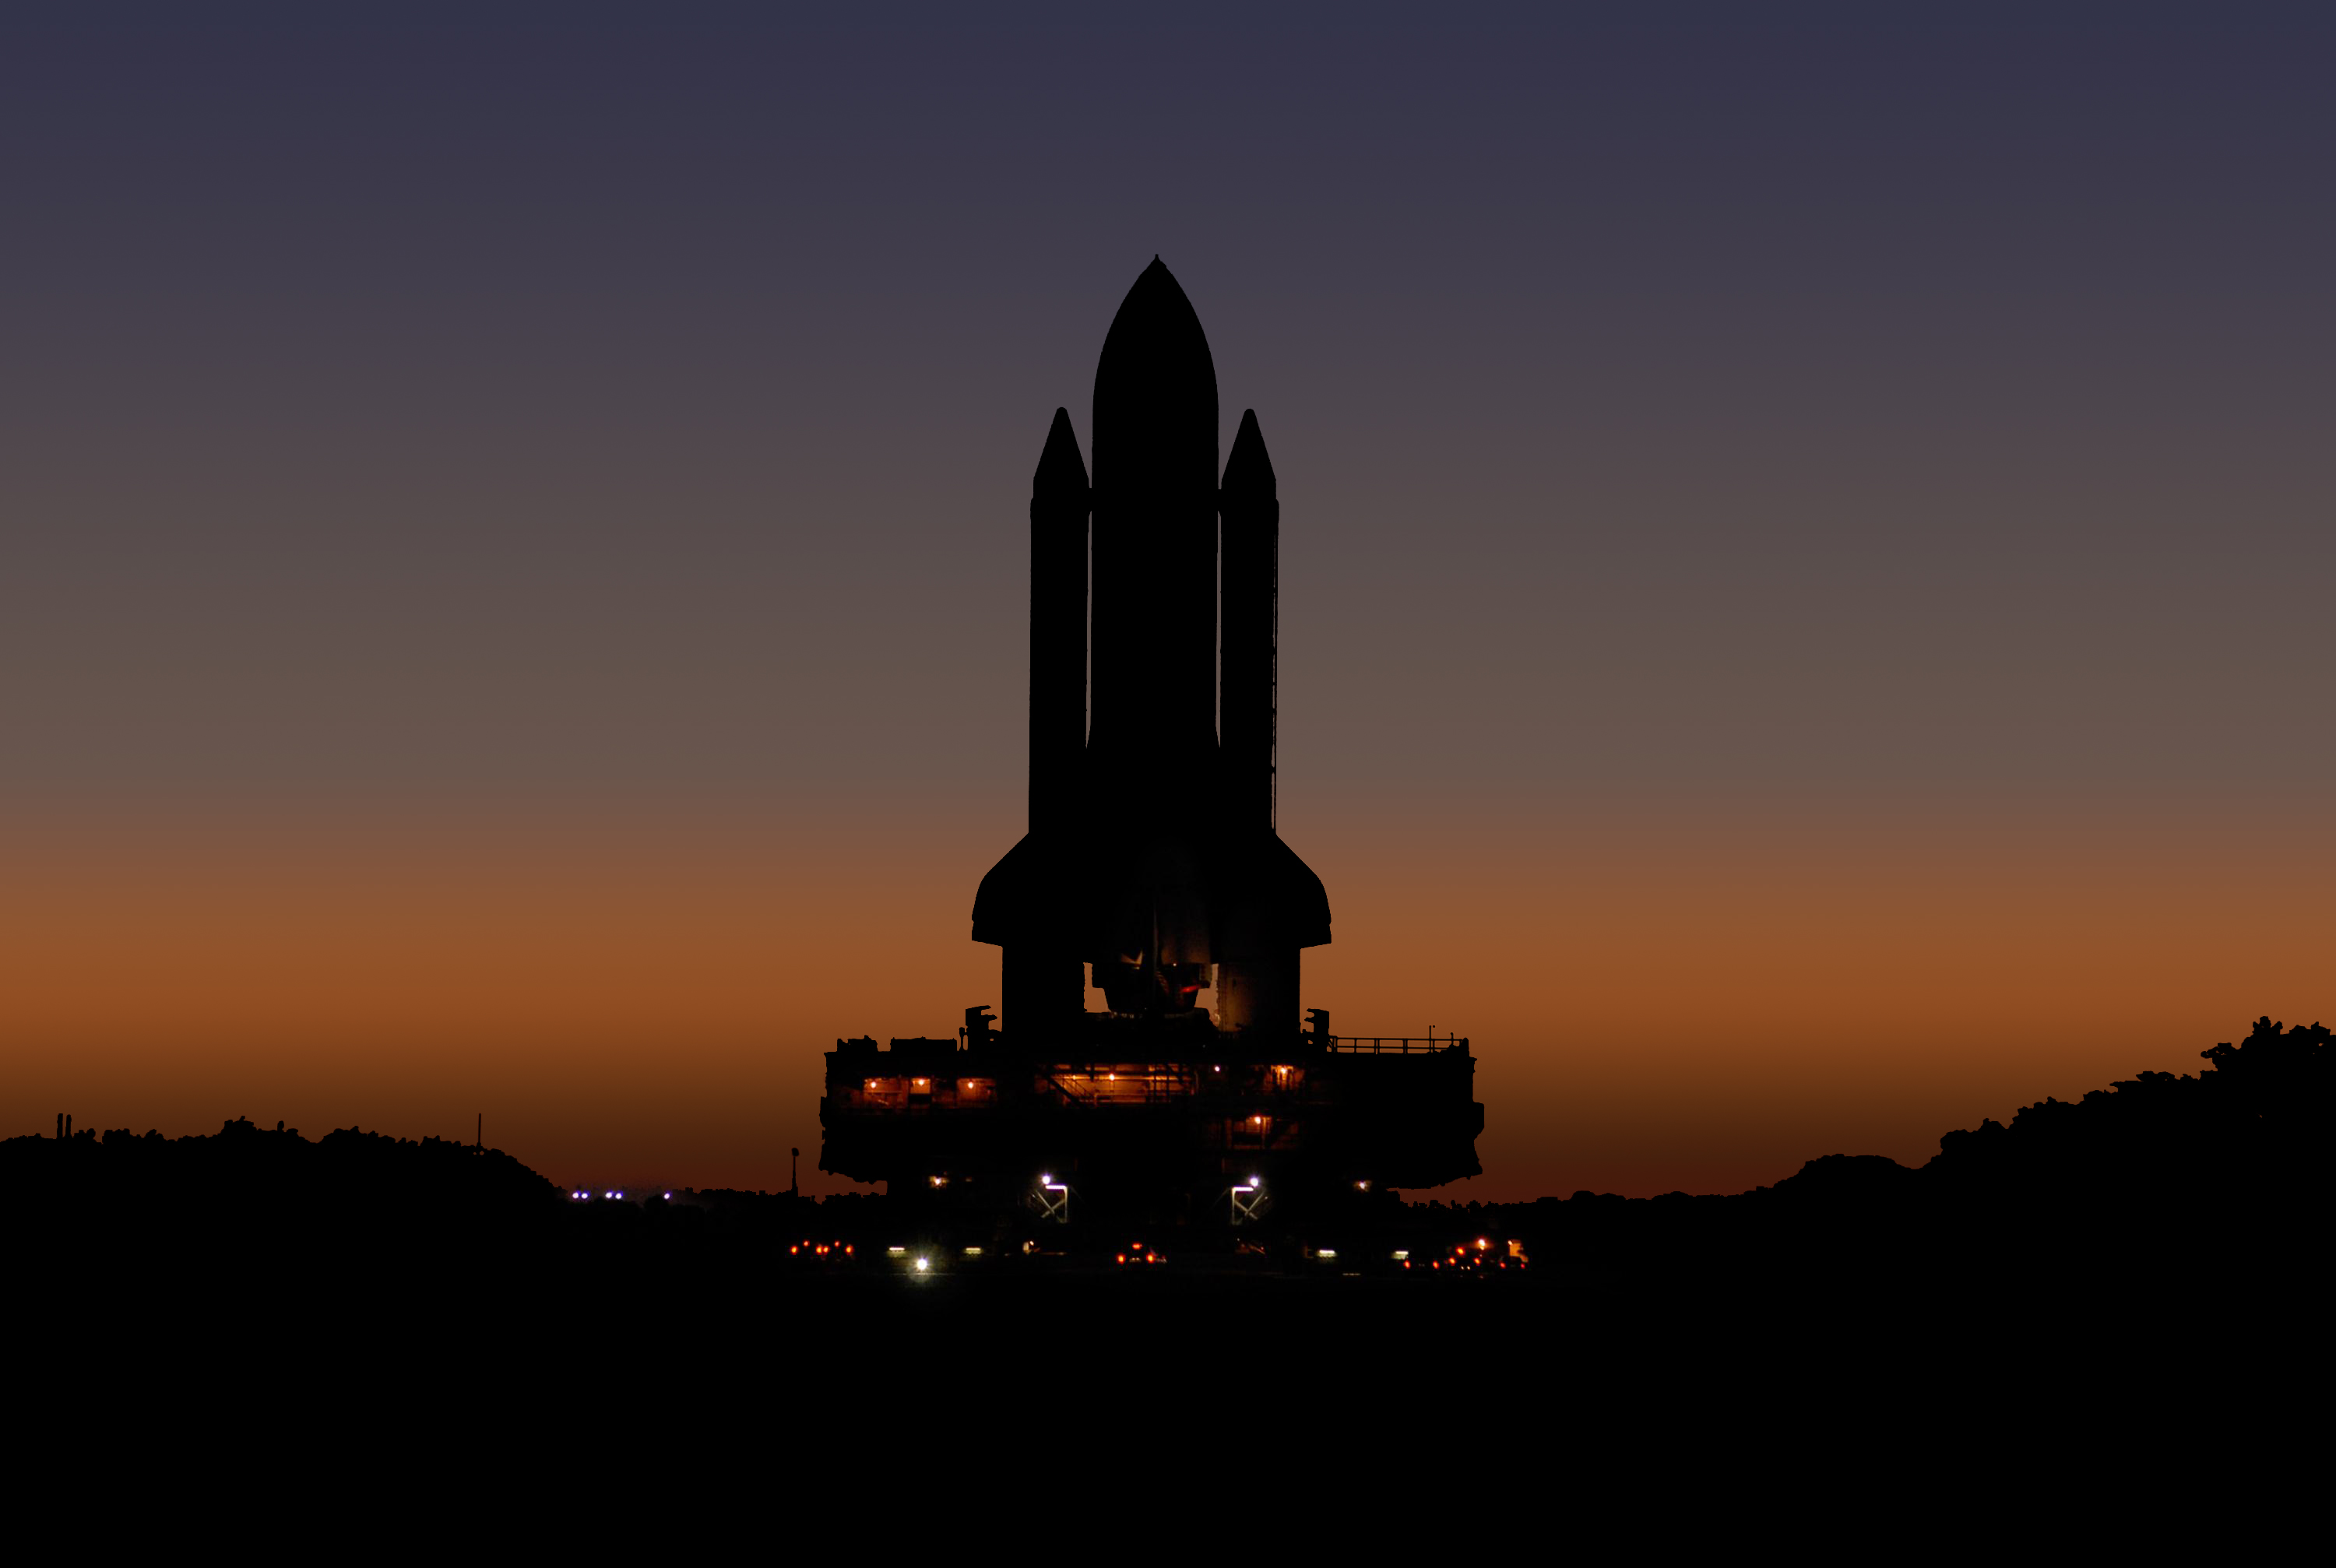 Vehicles Space Shuttle 3000x2014